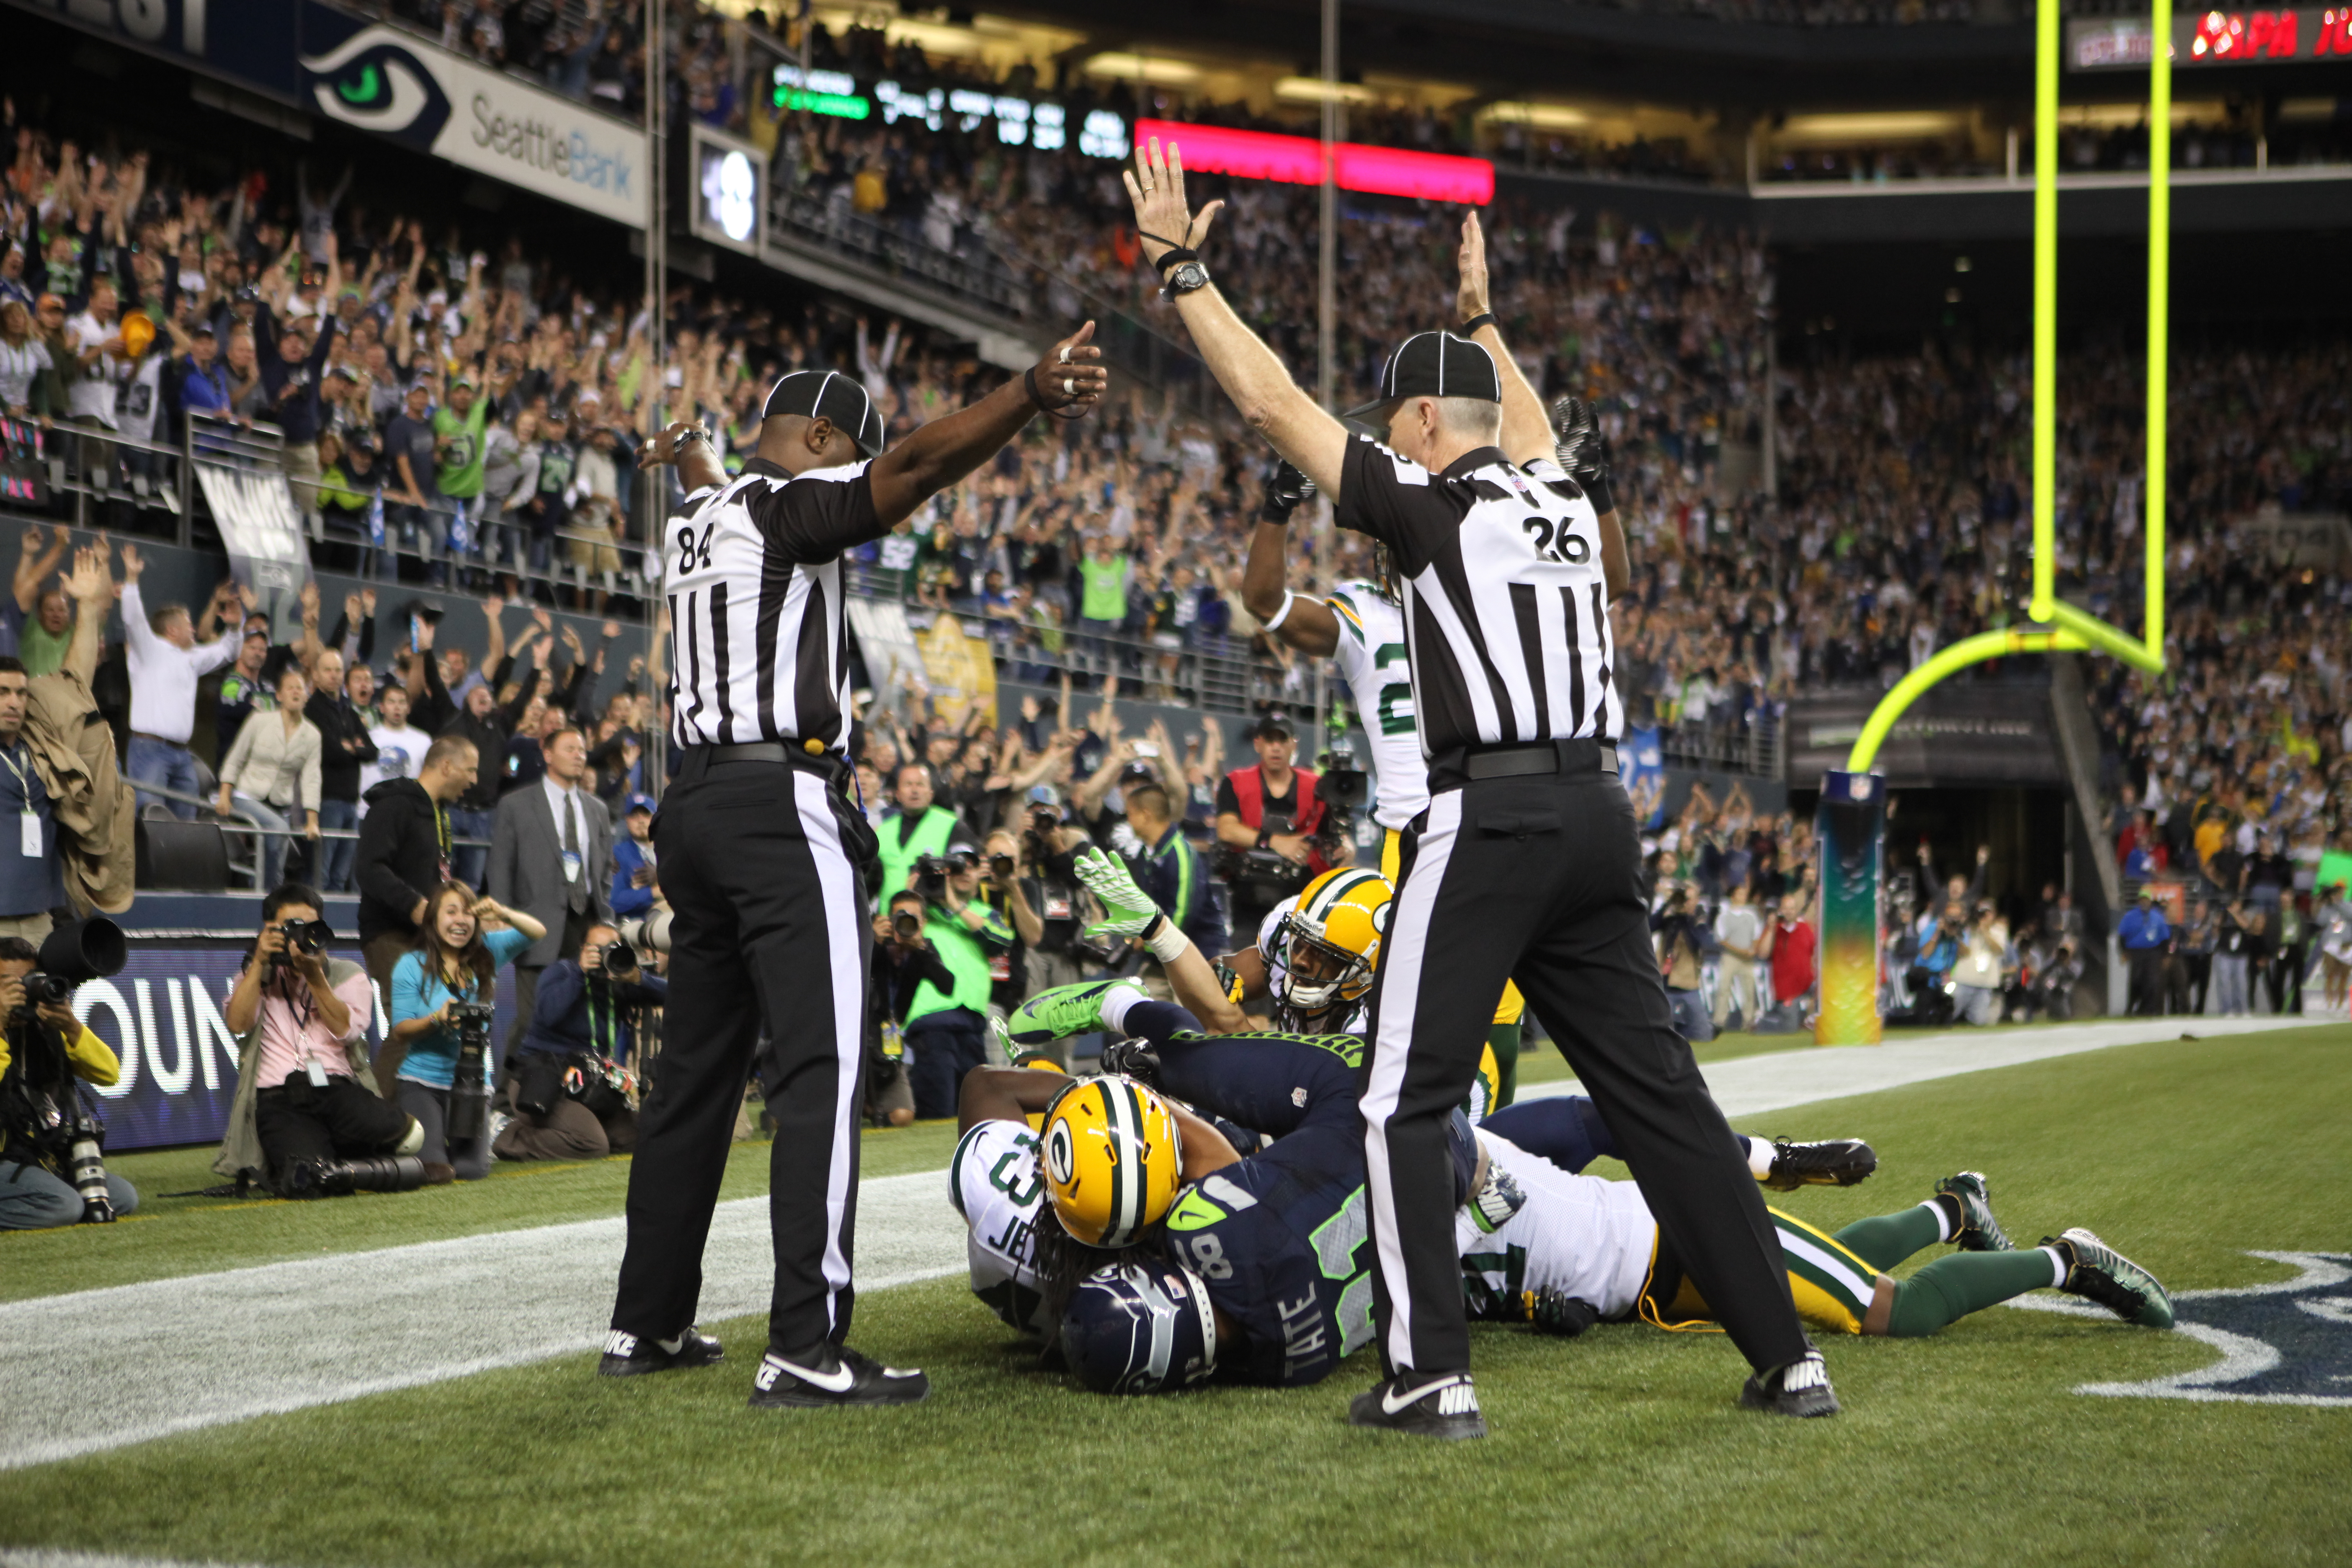 Green Bay Packers contra o Seattle Seahawks em 2012 - Créditos: Getty Images